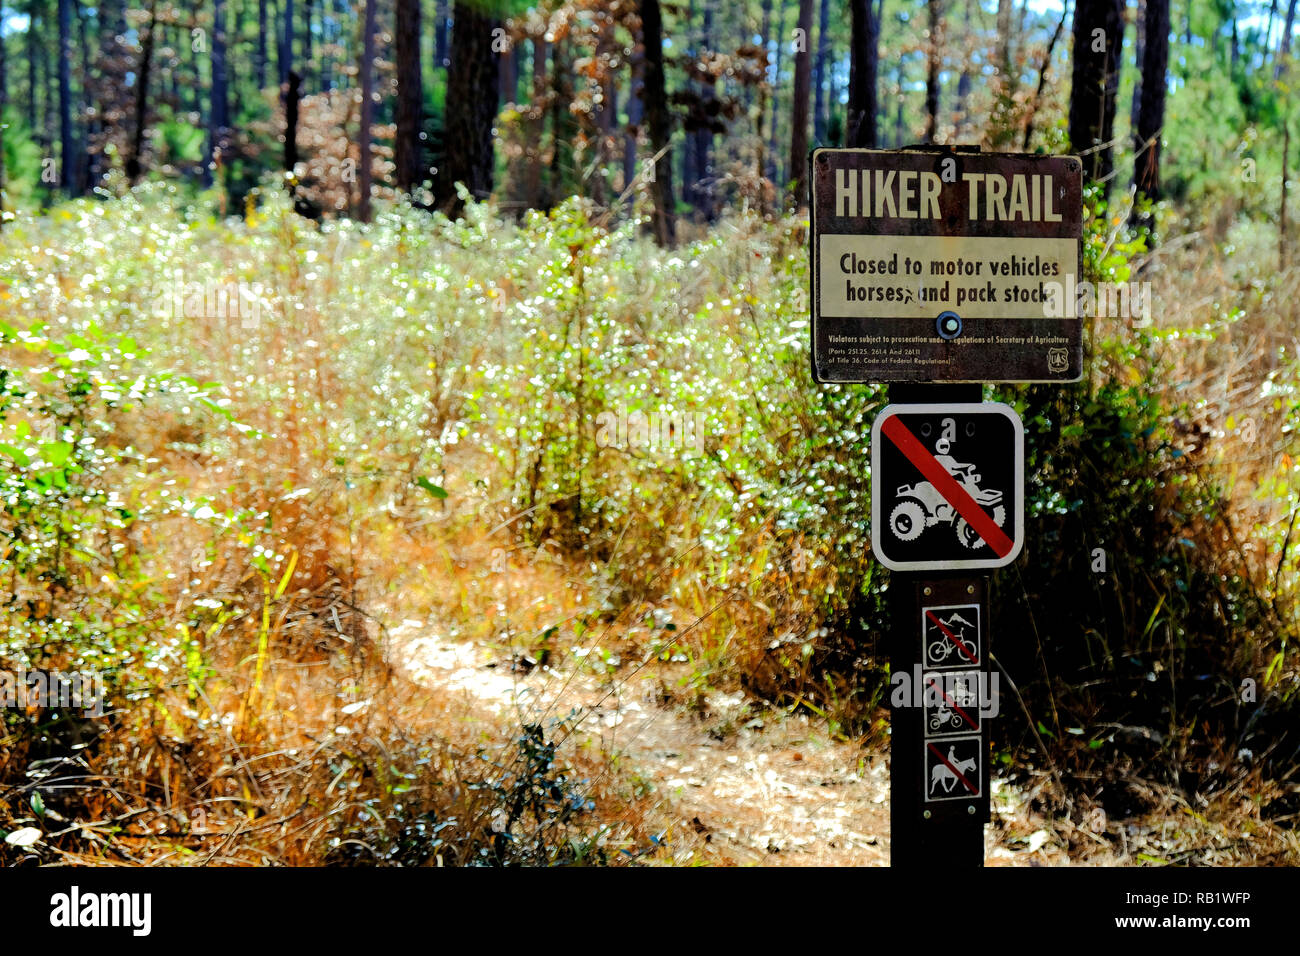 Skæbne opføre sig Diverse varer Hiker Trail sign at the Sam Houston National Forest in Texas prohibiting  motor vehicles, horses, and pack stock from using the hiking trail Stock  Photo - Alamy